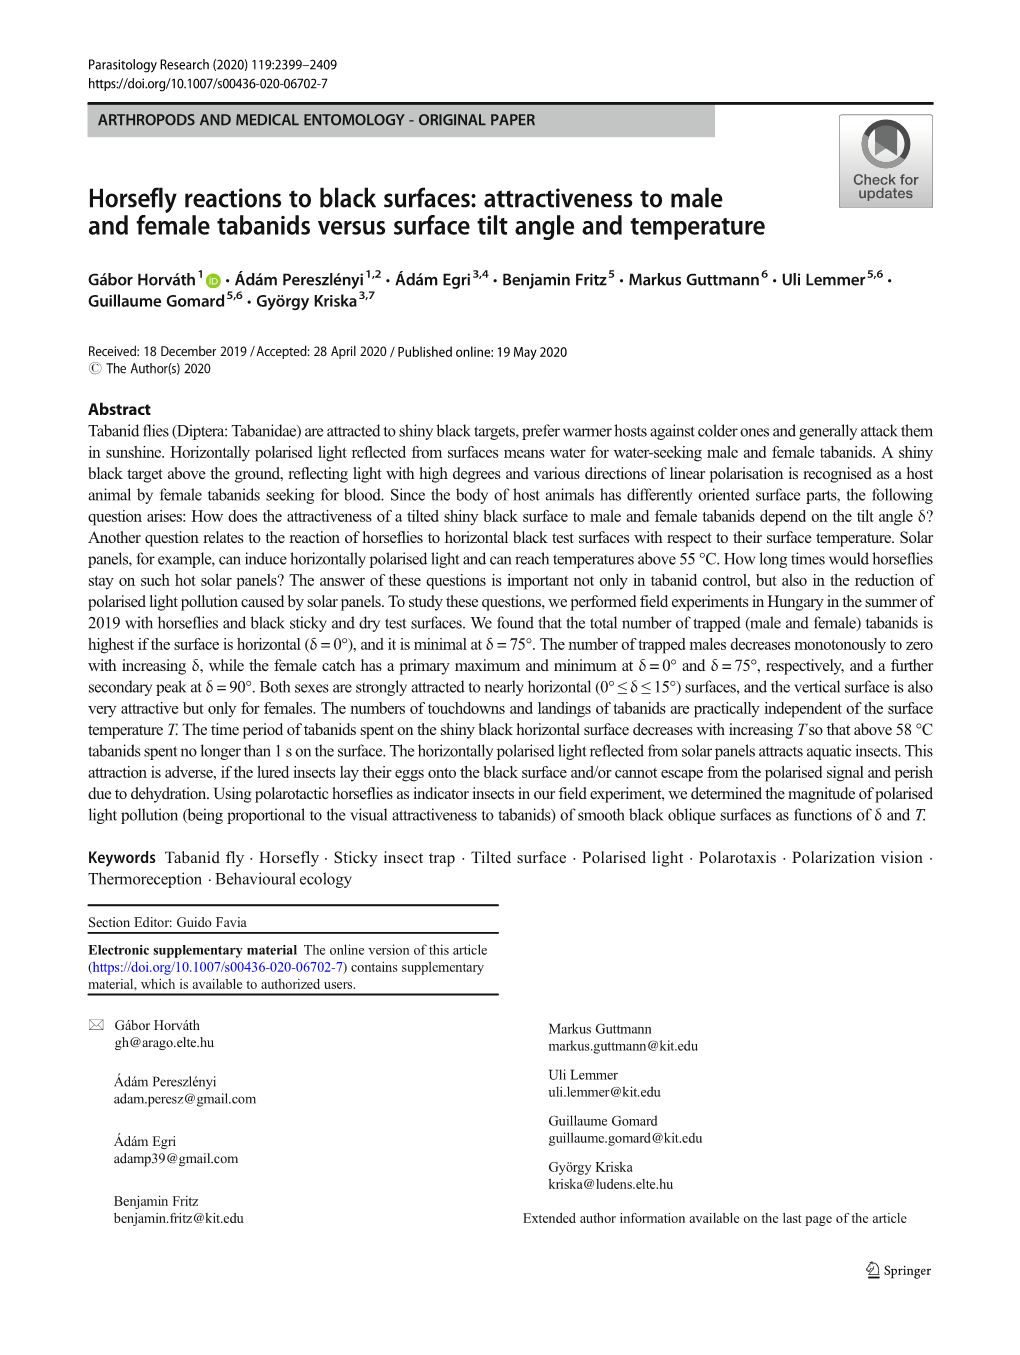 Horsefly Reactions to Black Surfaces: Attractiveness to Male and Female Tabanids Versus Surface Tilt Angle and Temperature